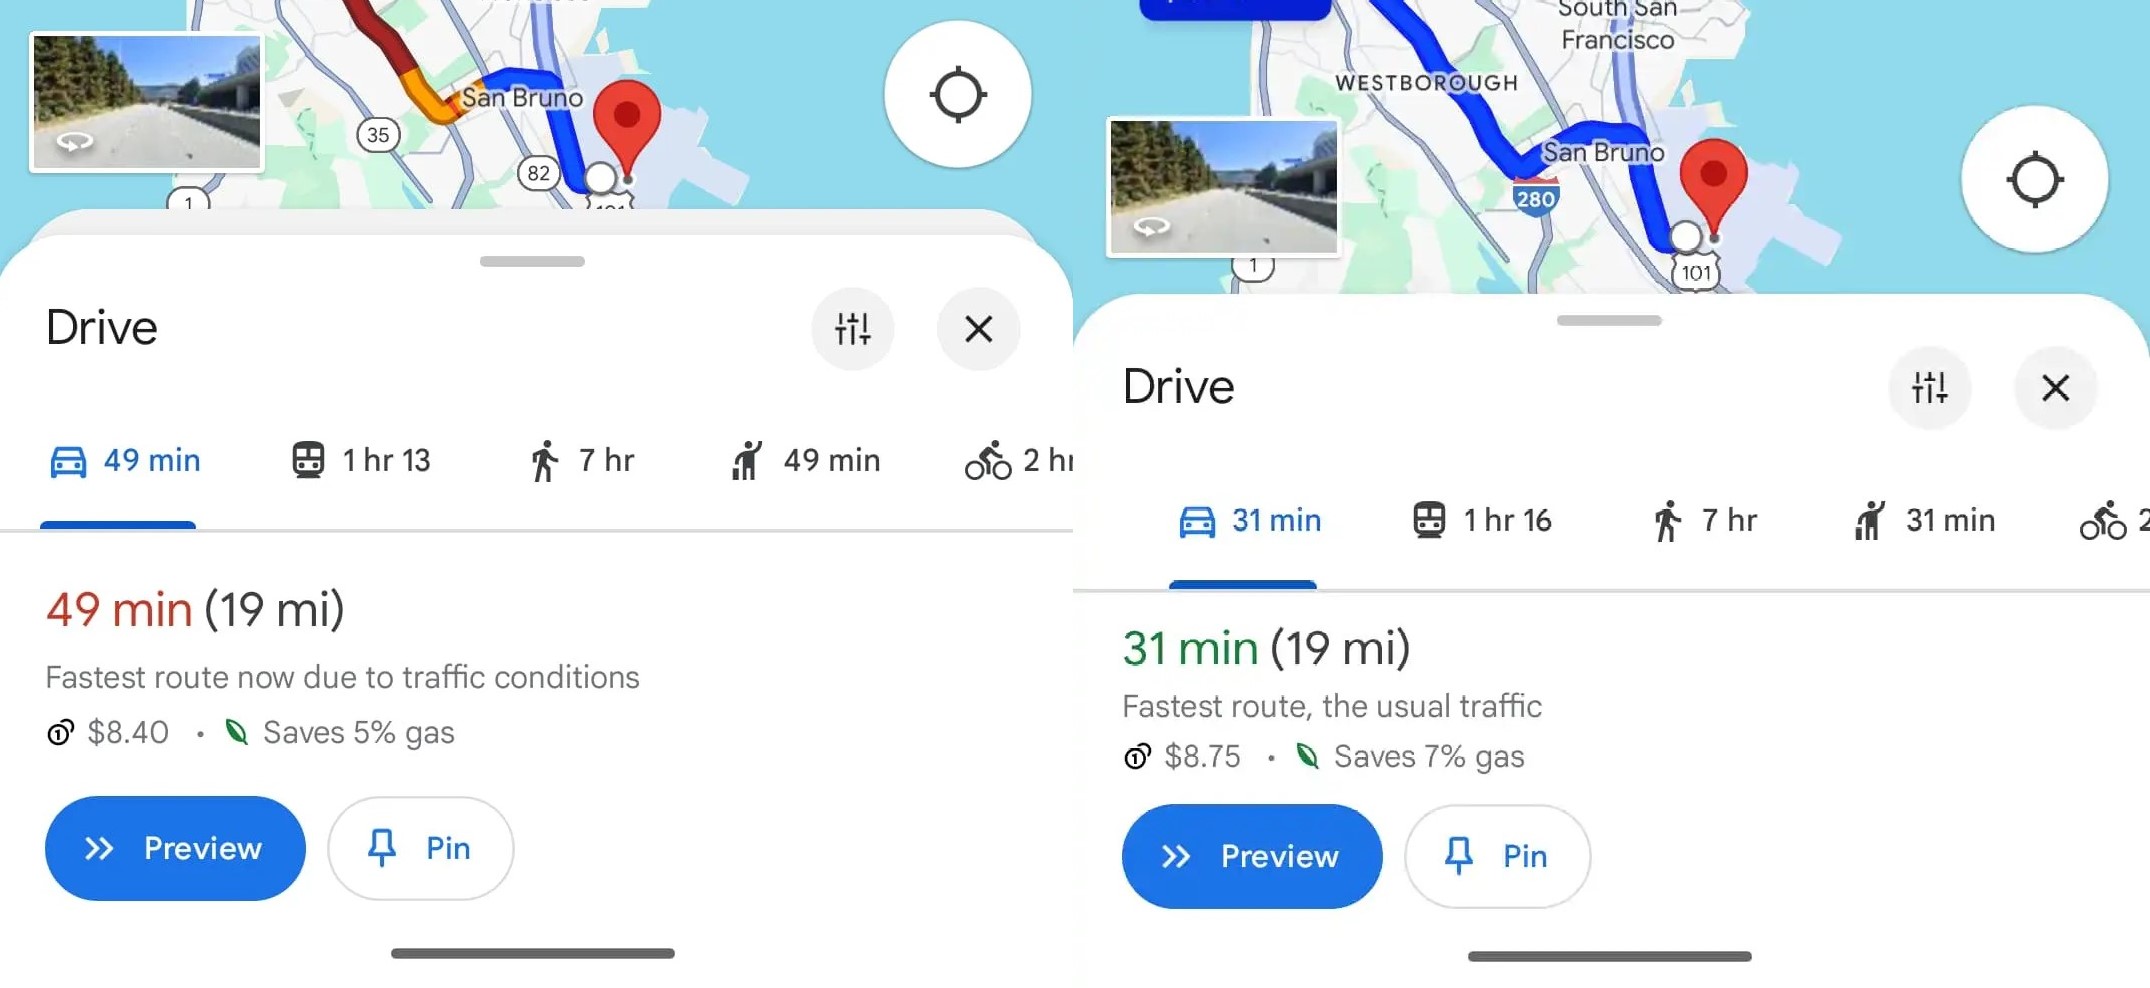 The Google Maps UI changes